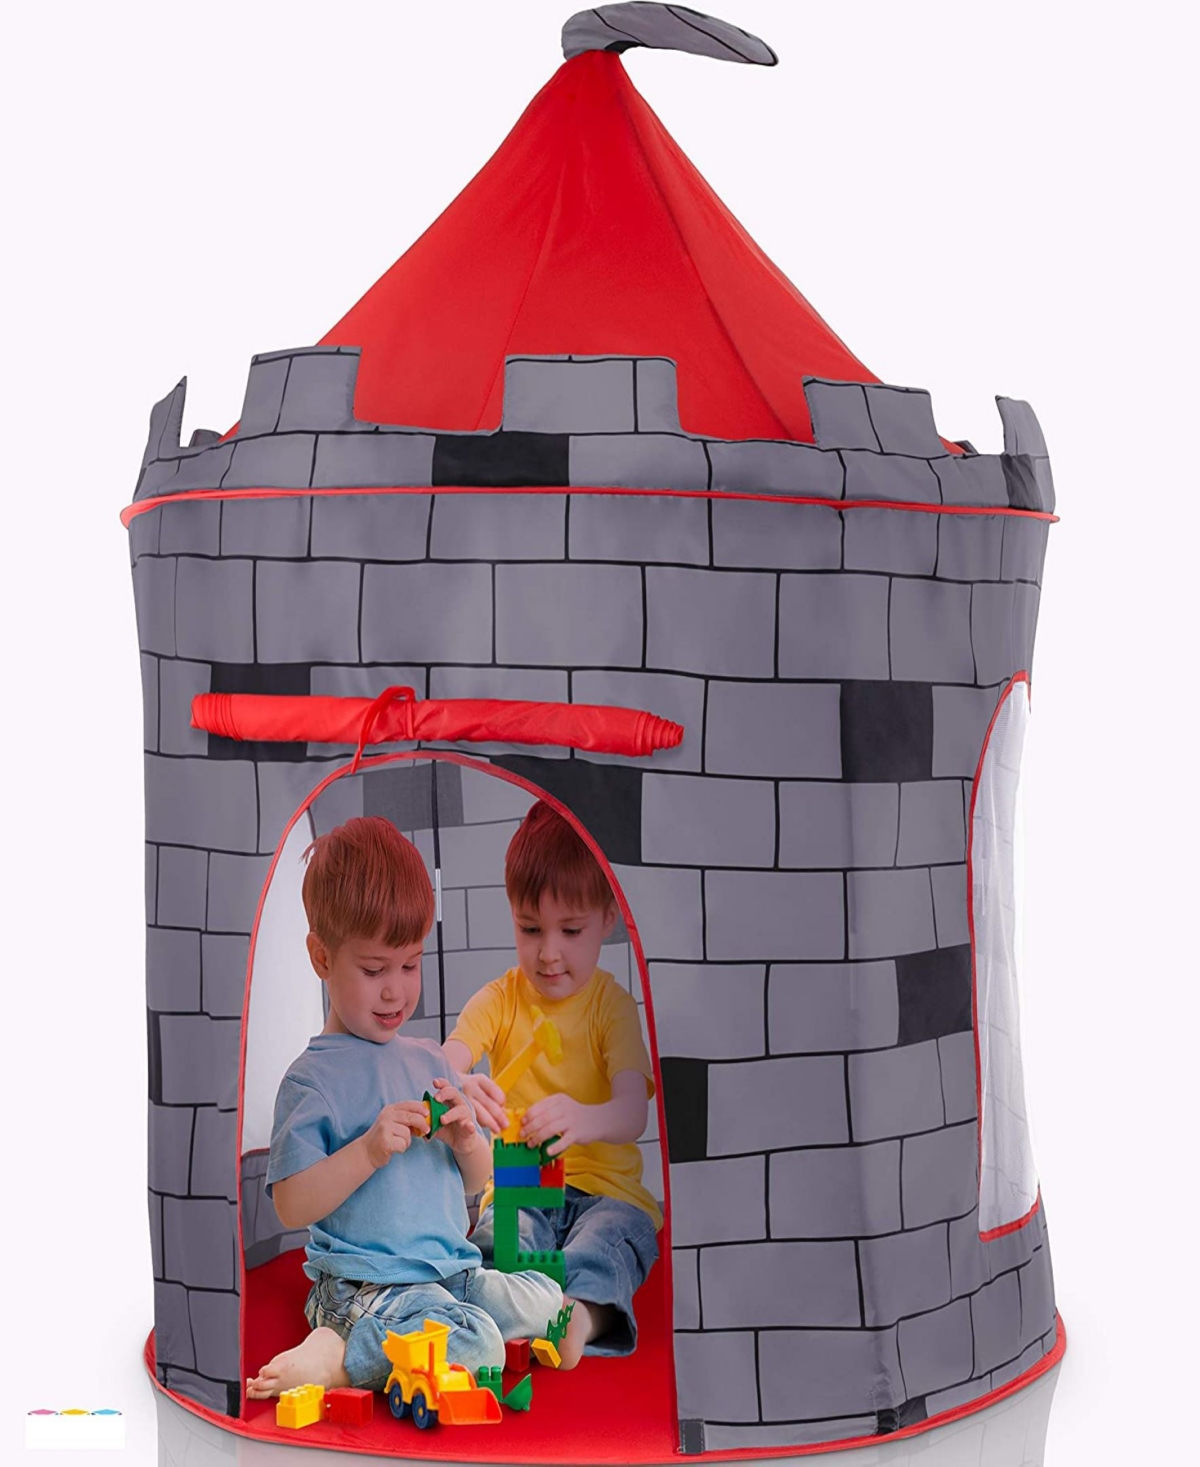 Play22 Babies' Kids Play Tent Knight Castle Portable Fordable Camper Tent In Multicolor